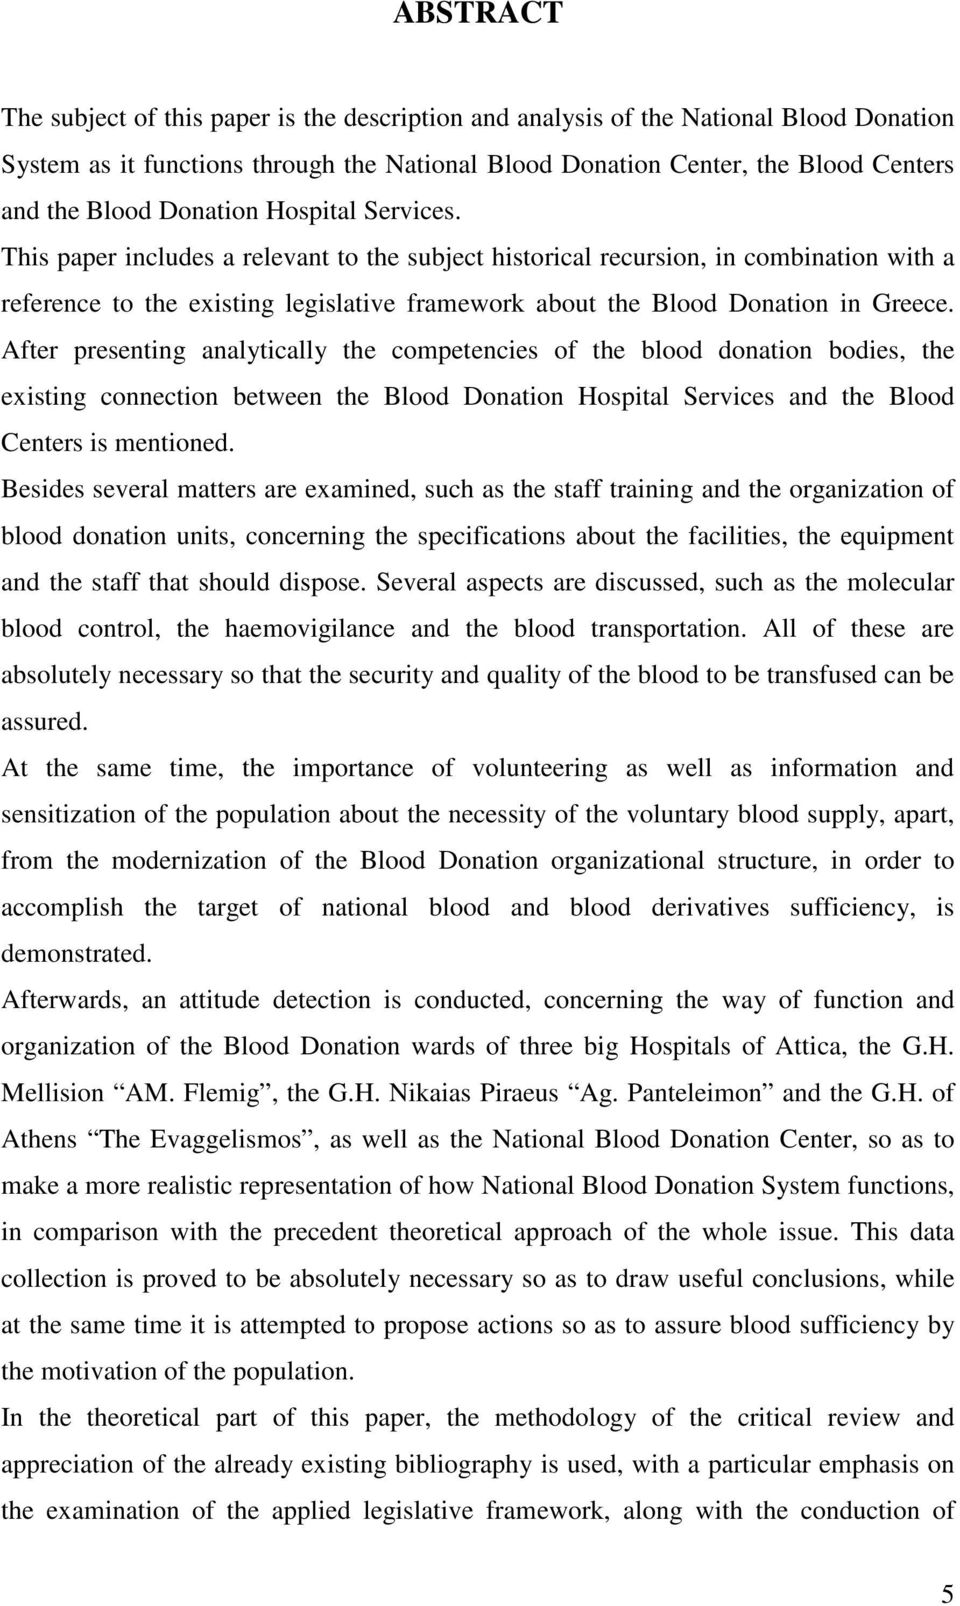 This paper includes a relevant to the subject historical recursion, in combination with a reference to the existing legislative framework about the Blood Donation in Greece.